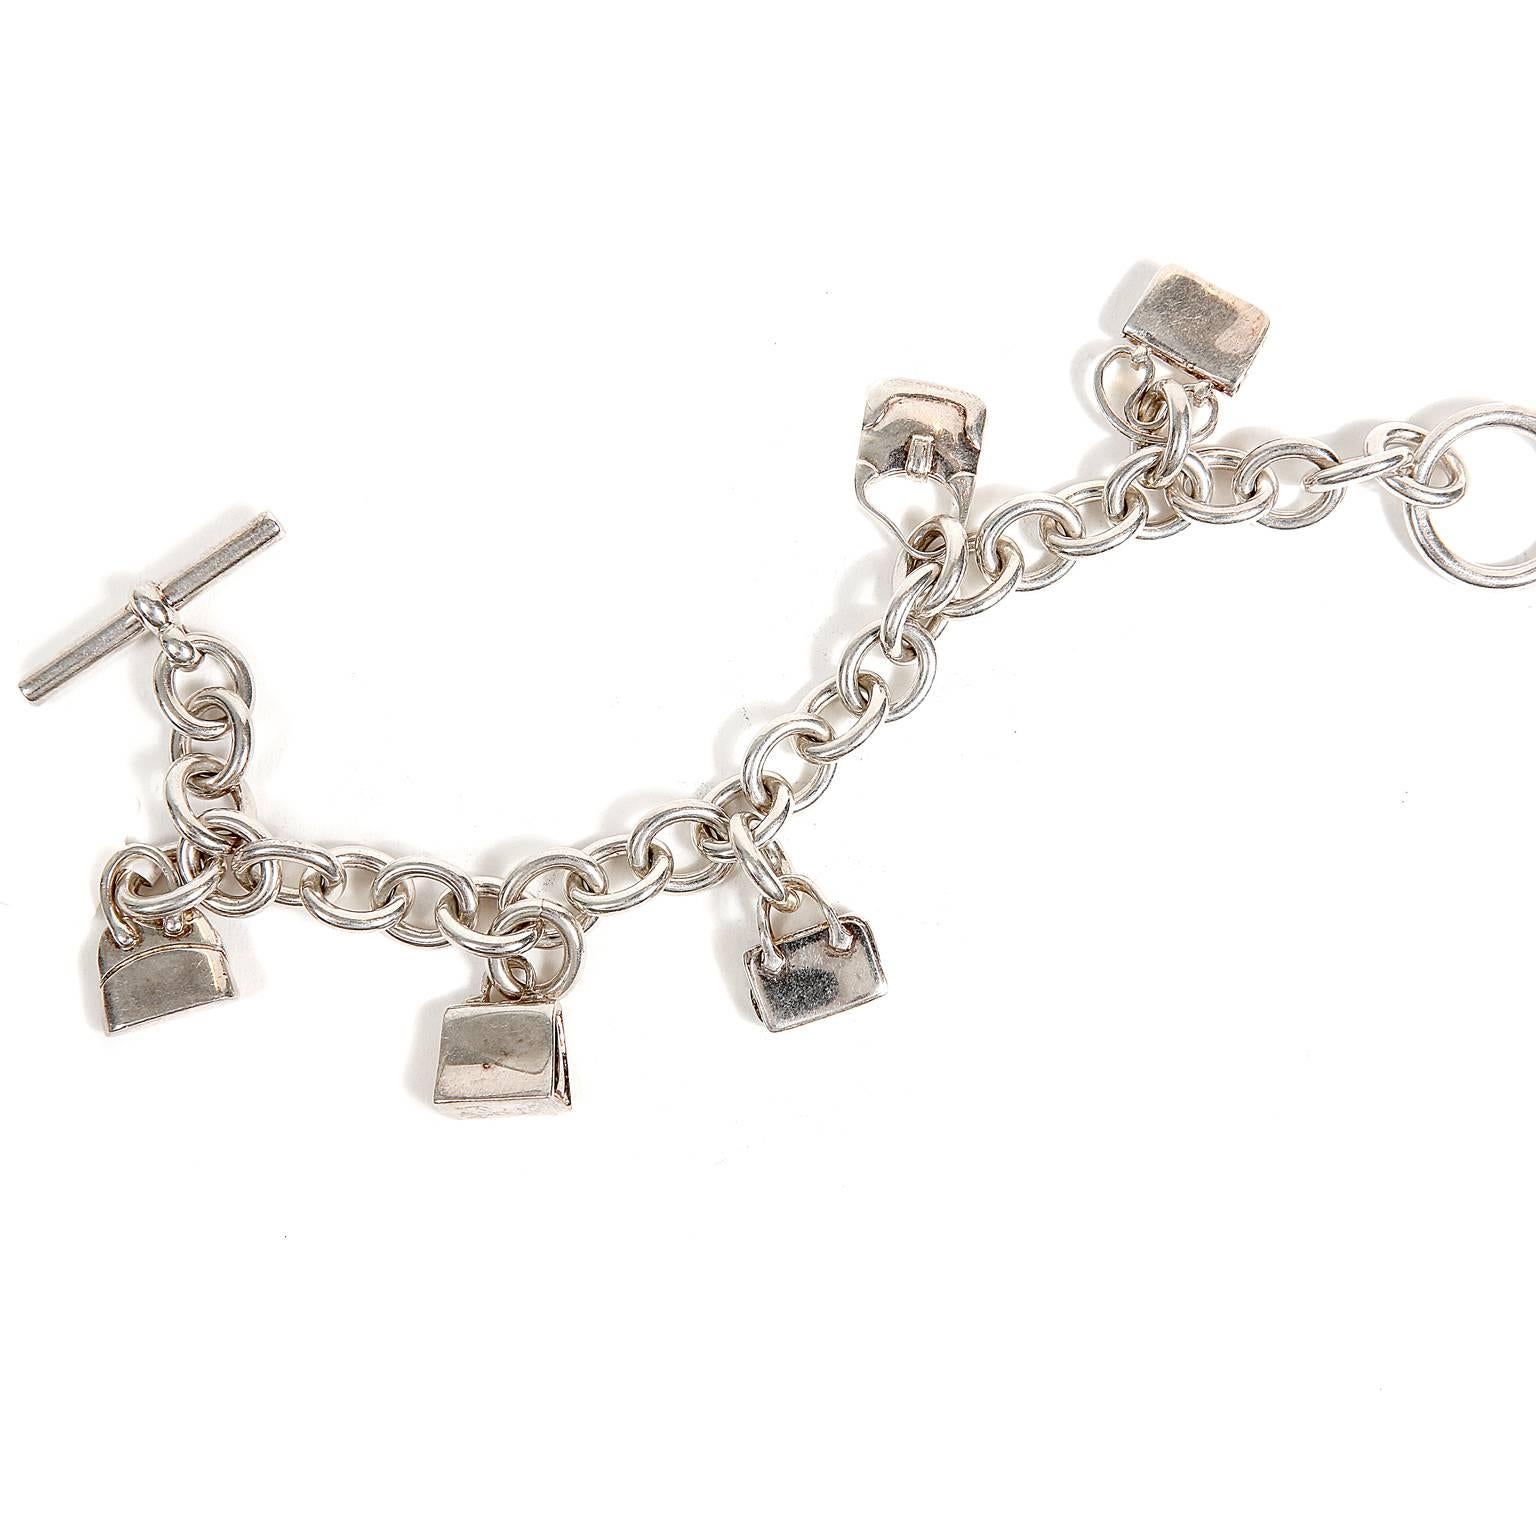 Hermès Sterling Silver Charm Bracelet- PRISTINE
  Adorned with five iconic Hermès bag charms, this is a wonderful piece for any collection. 

Silver link chain with toggle closure.  Five iconic bag charms include a Constance, Kelly, Plume, Trim and